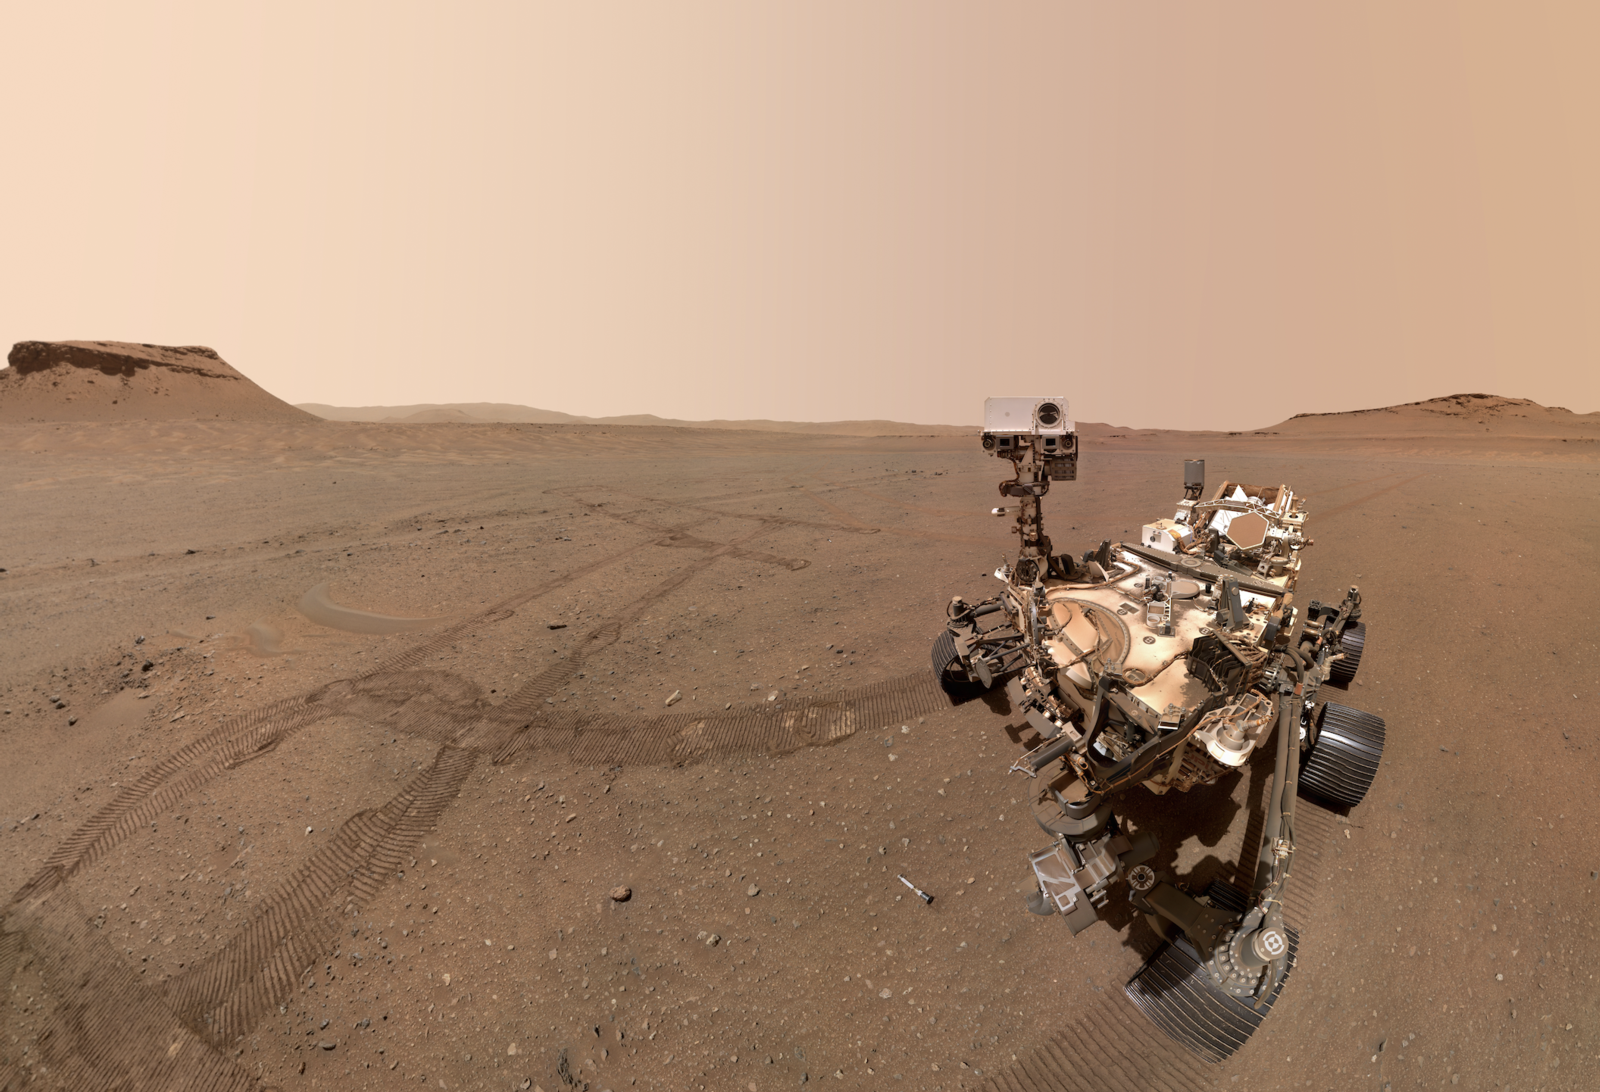 Toward multiplanetary existence? The human rights obligations of corporations on Mars